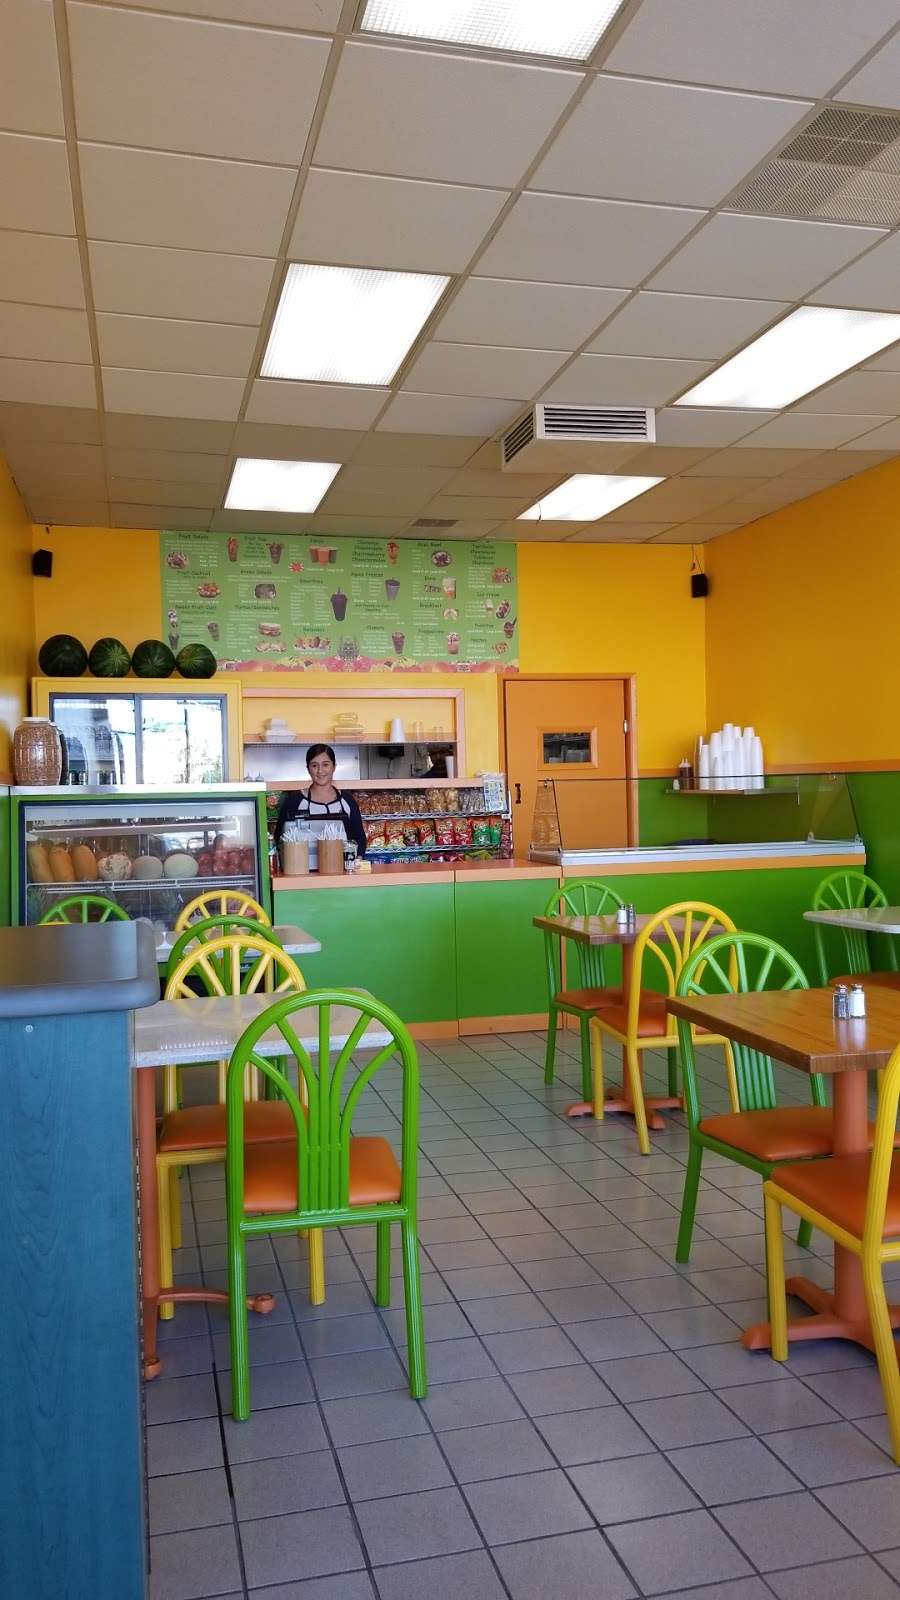 Fruity Loco | 507 Sweetwater Rd, Spring Valley, CA 91977 | Phone: (619) 825-3434